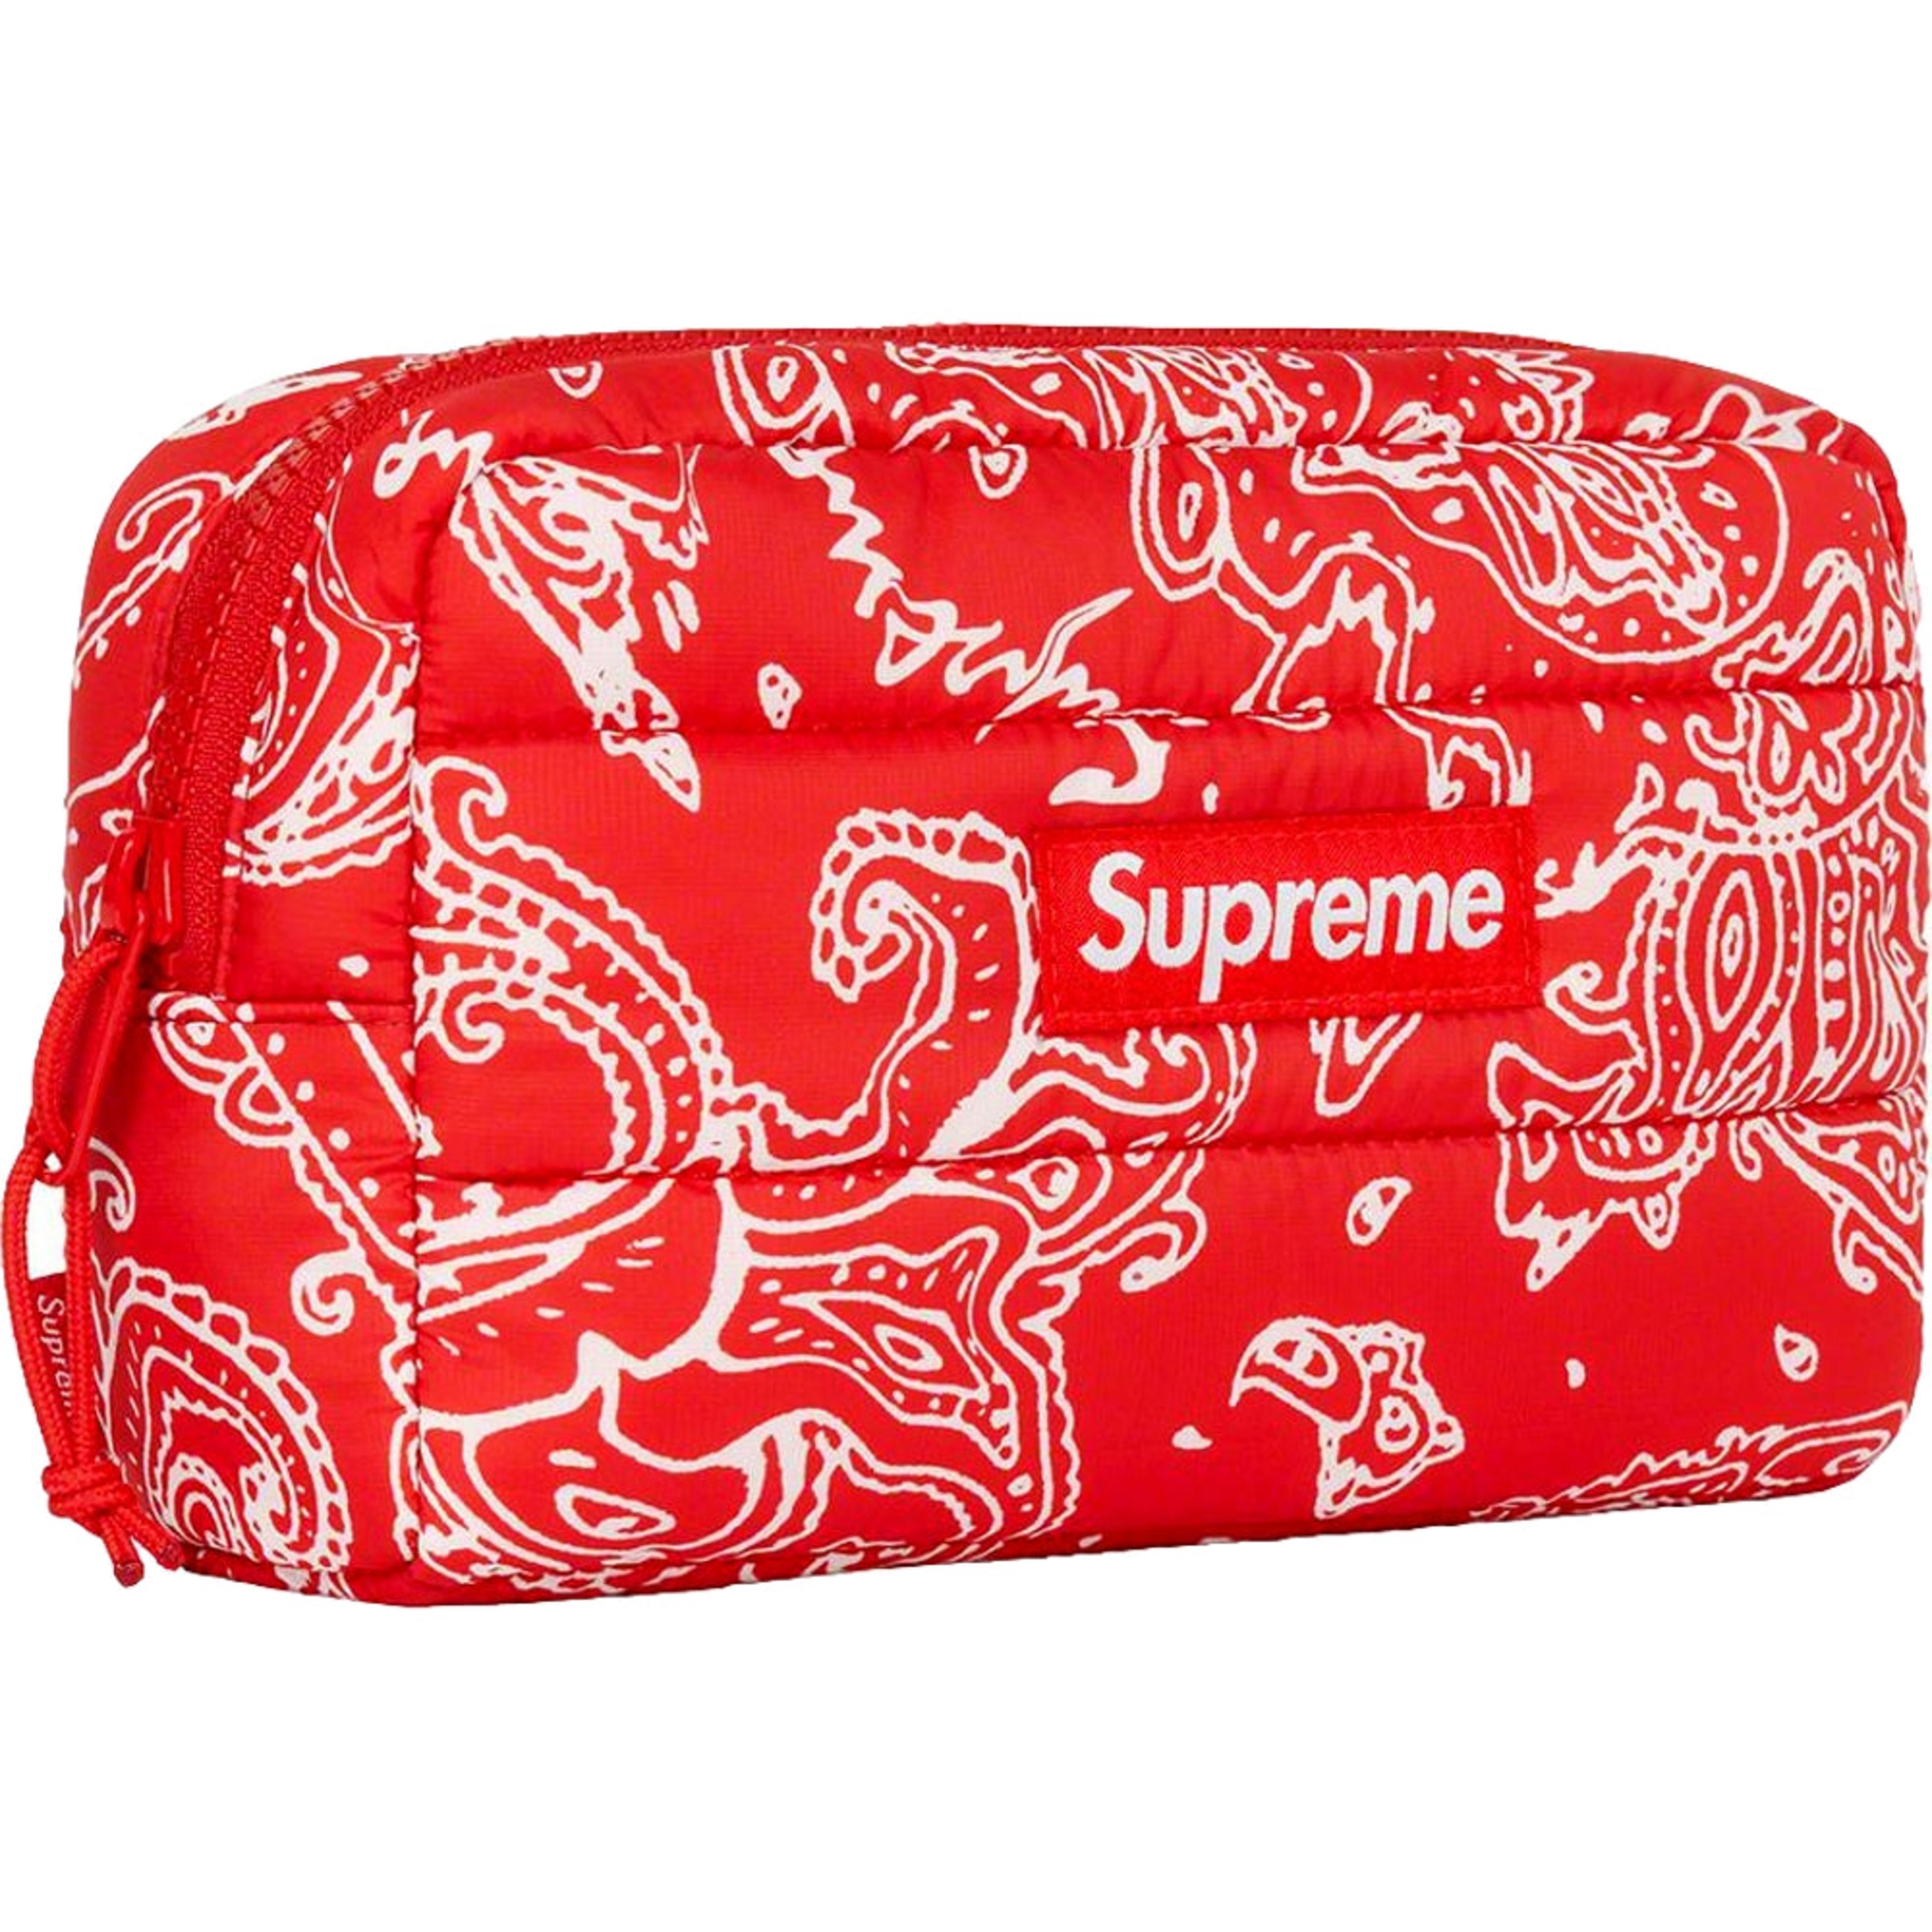 SUPREME PUFFER BACKPACK-RED - Popcorn Store